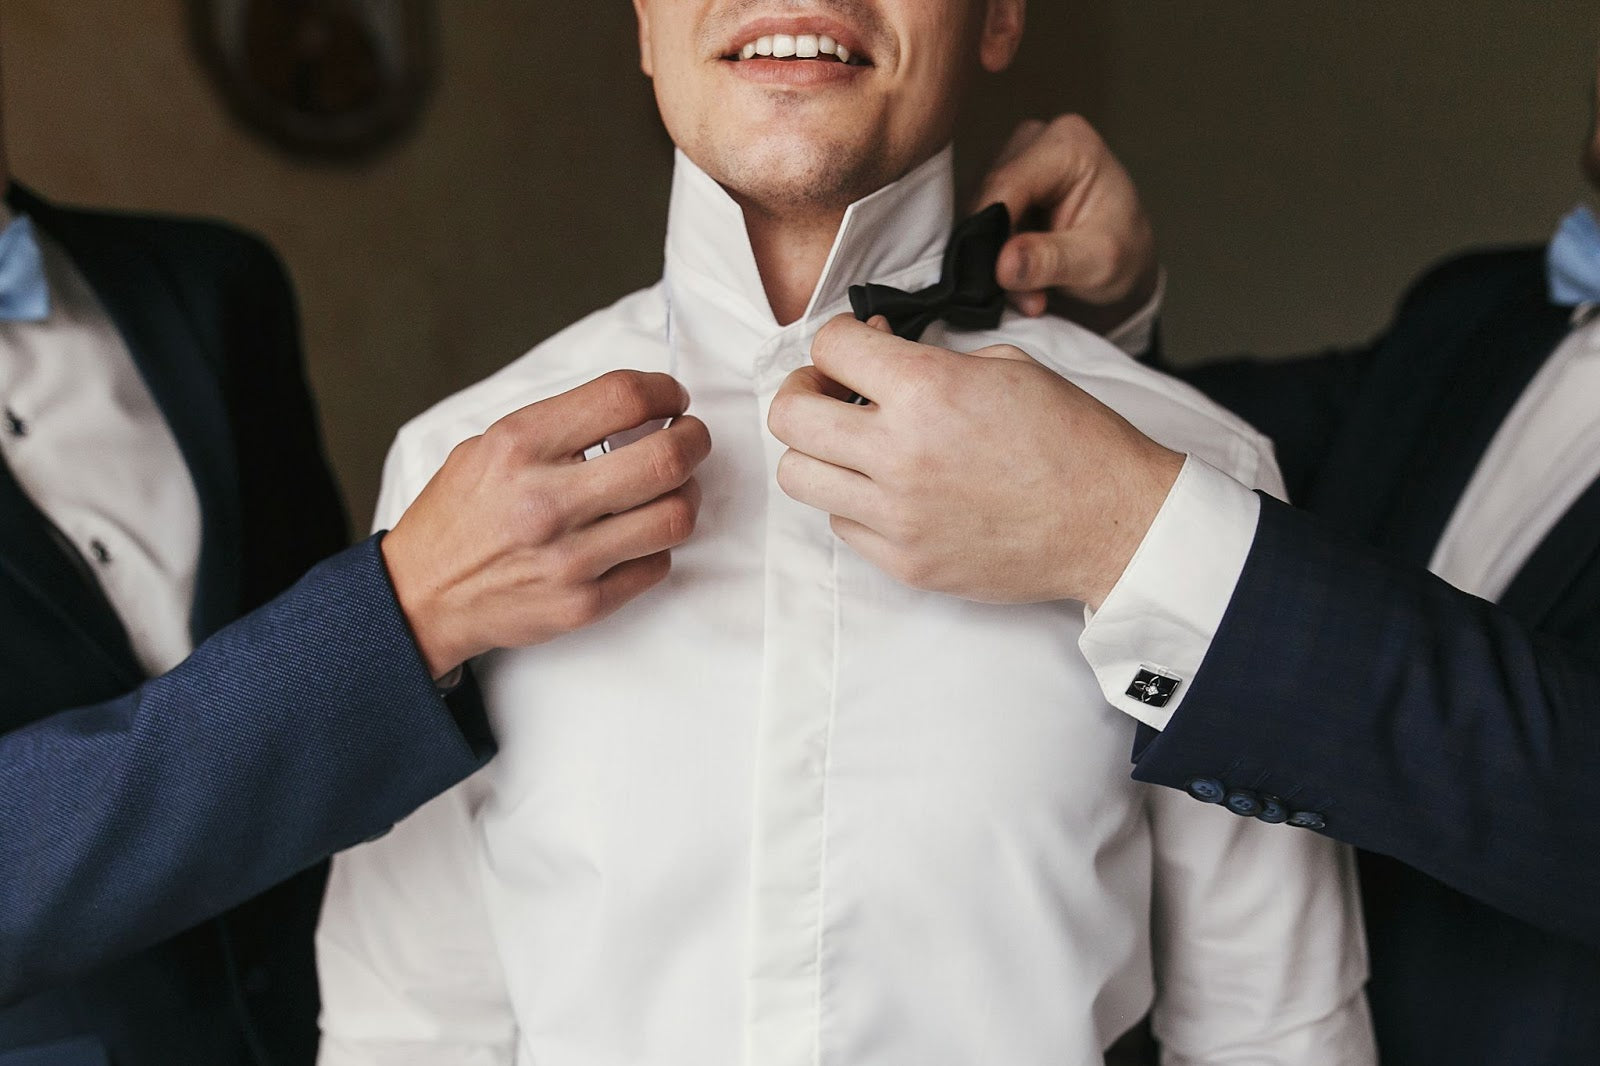 Foolproof Men's Fashion Tips for Your Friend’s Wedding - XSuit